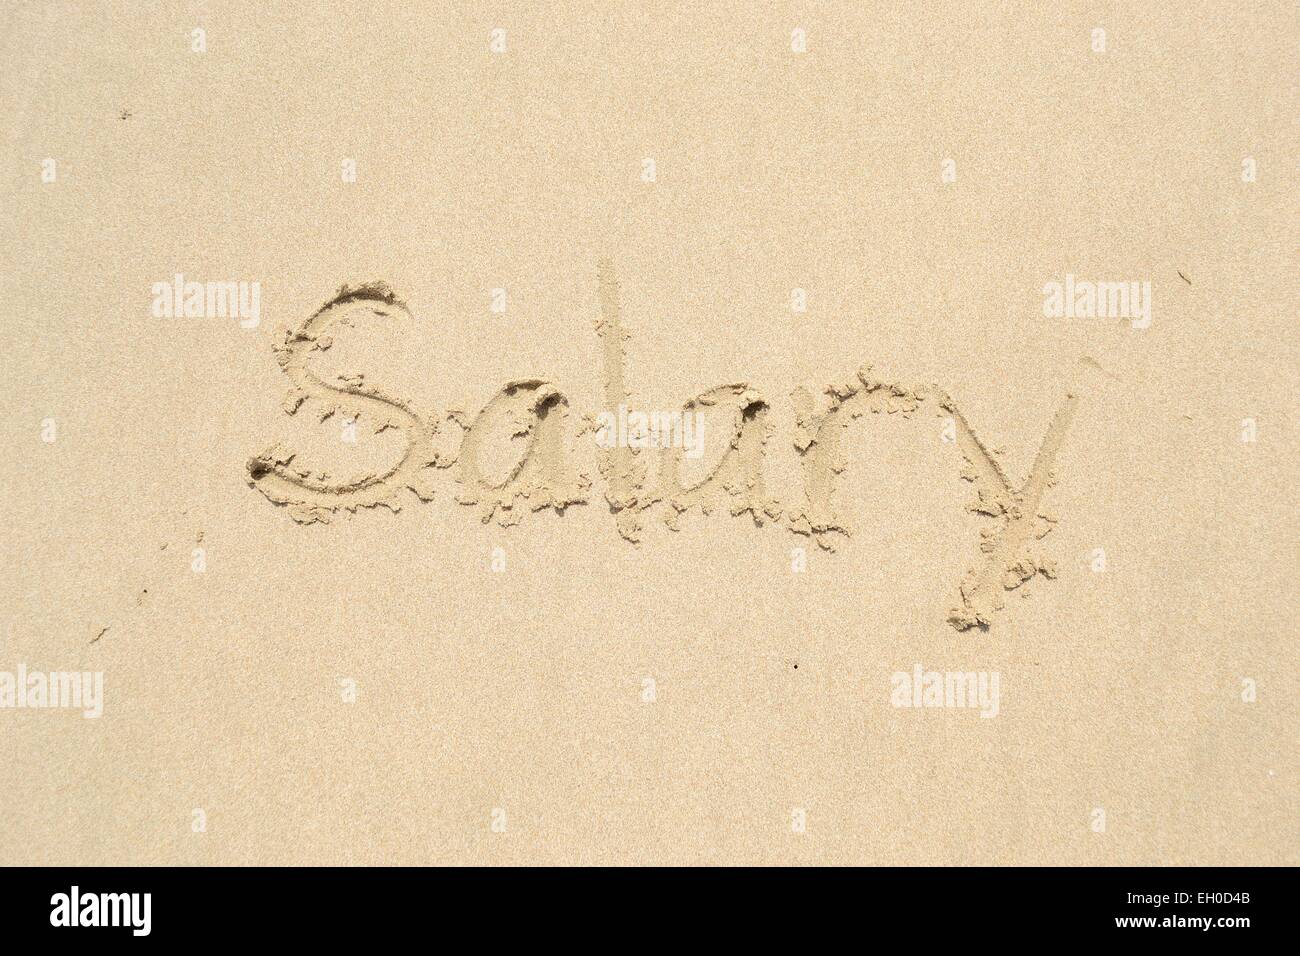 Hand drawn of a word salary on the beach Stock Photo